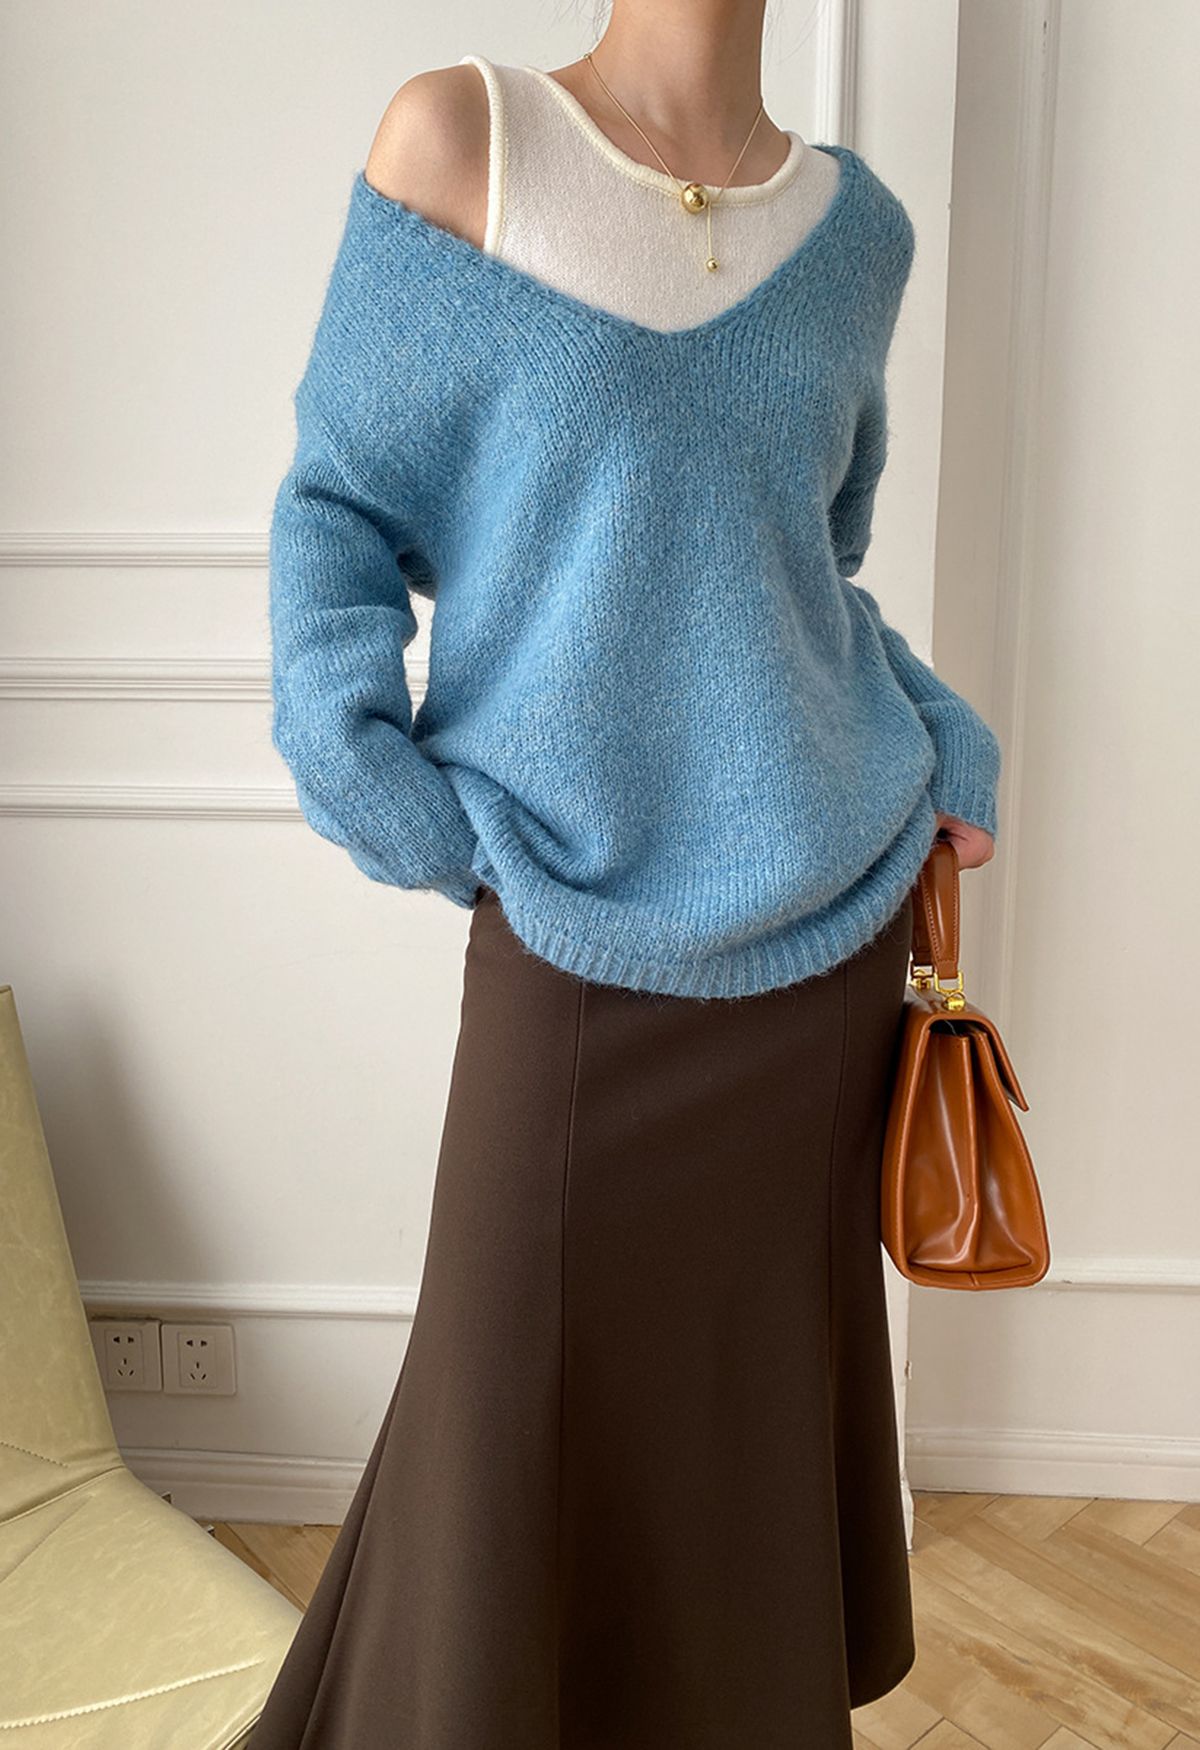 Contrast Tank Top and V-Neck Sweater Set in Blue